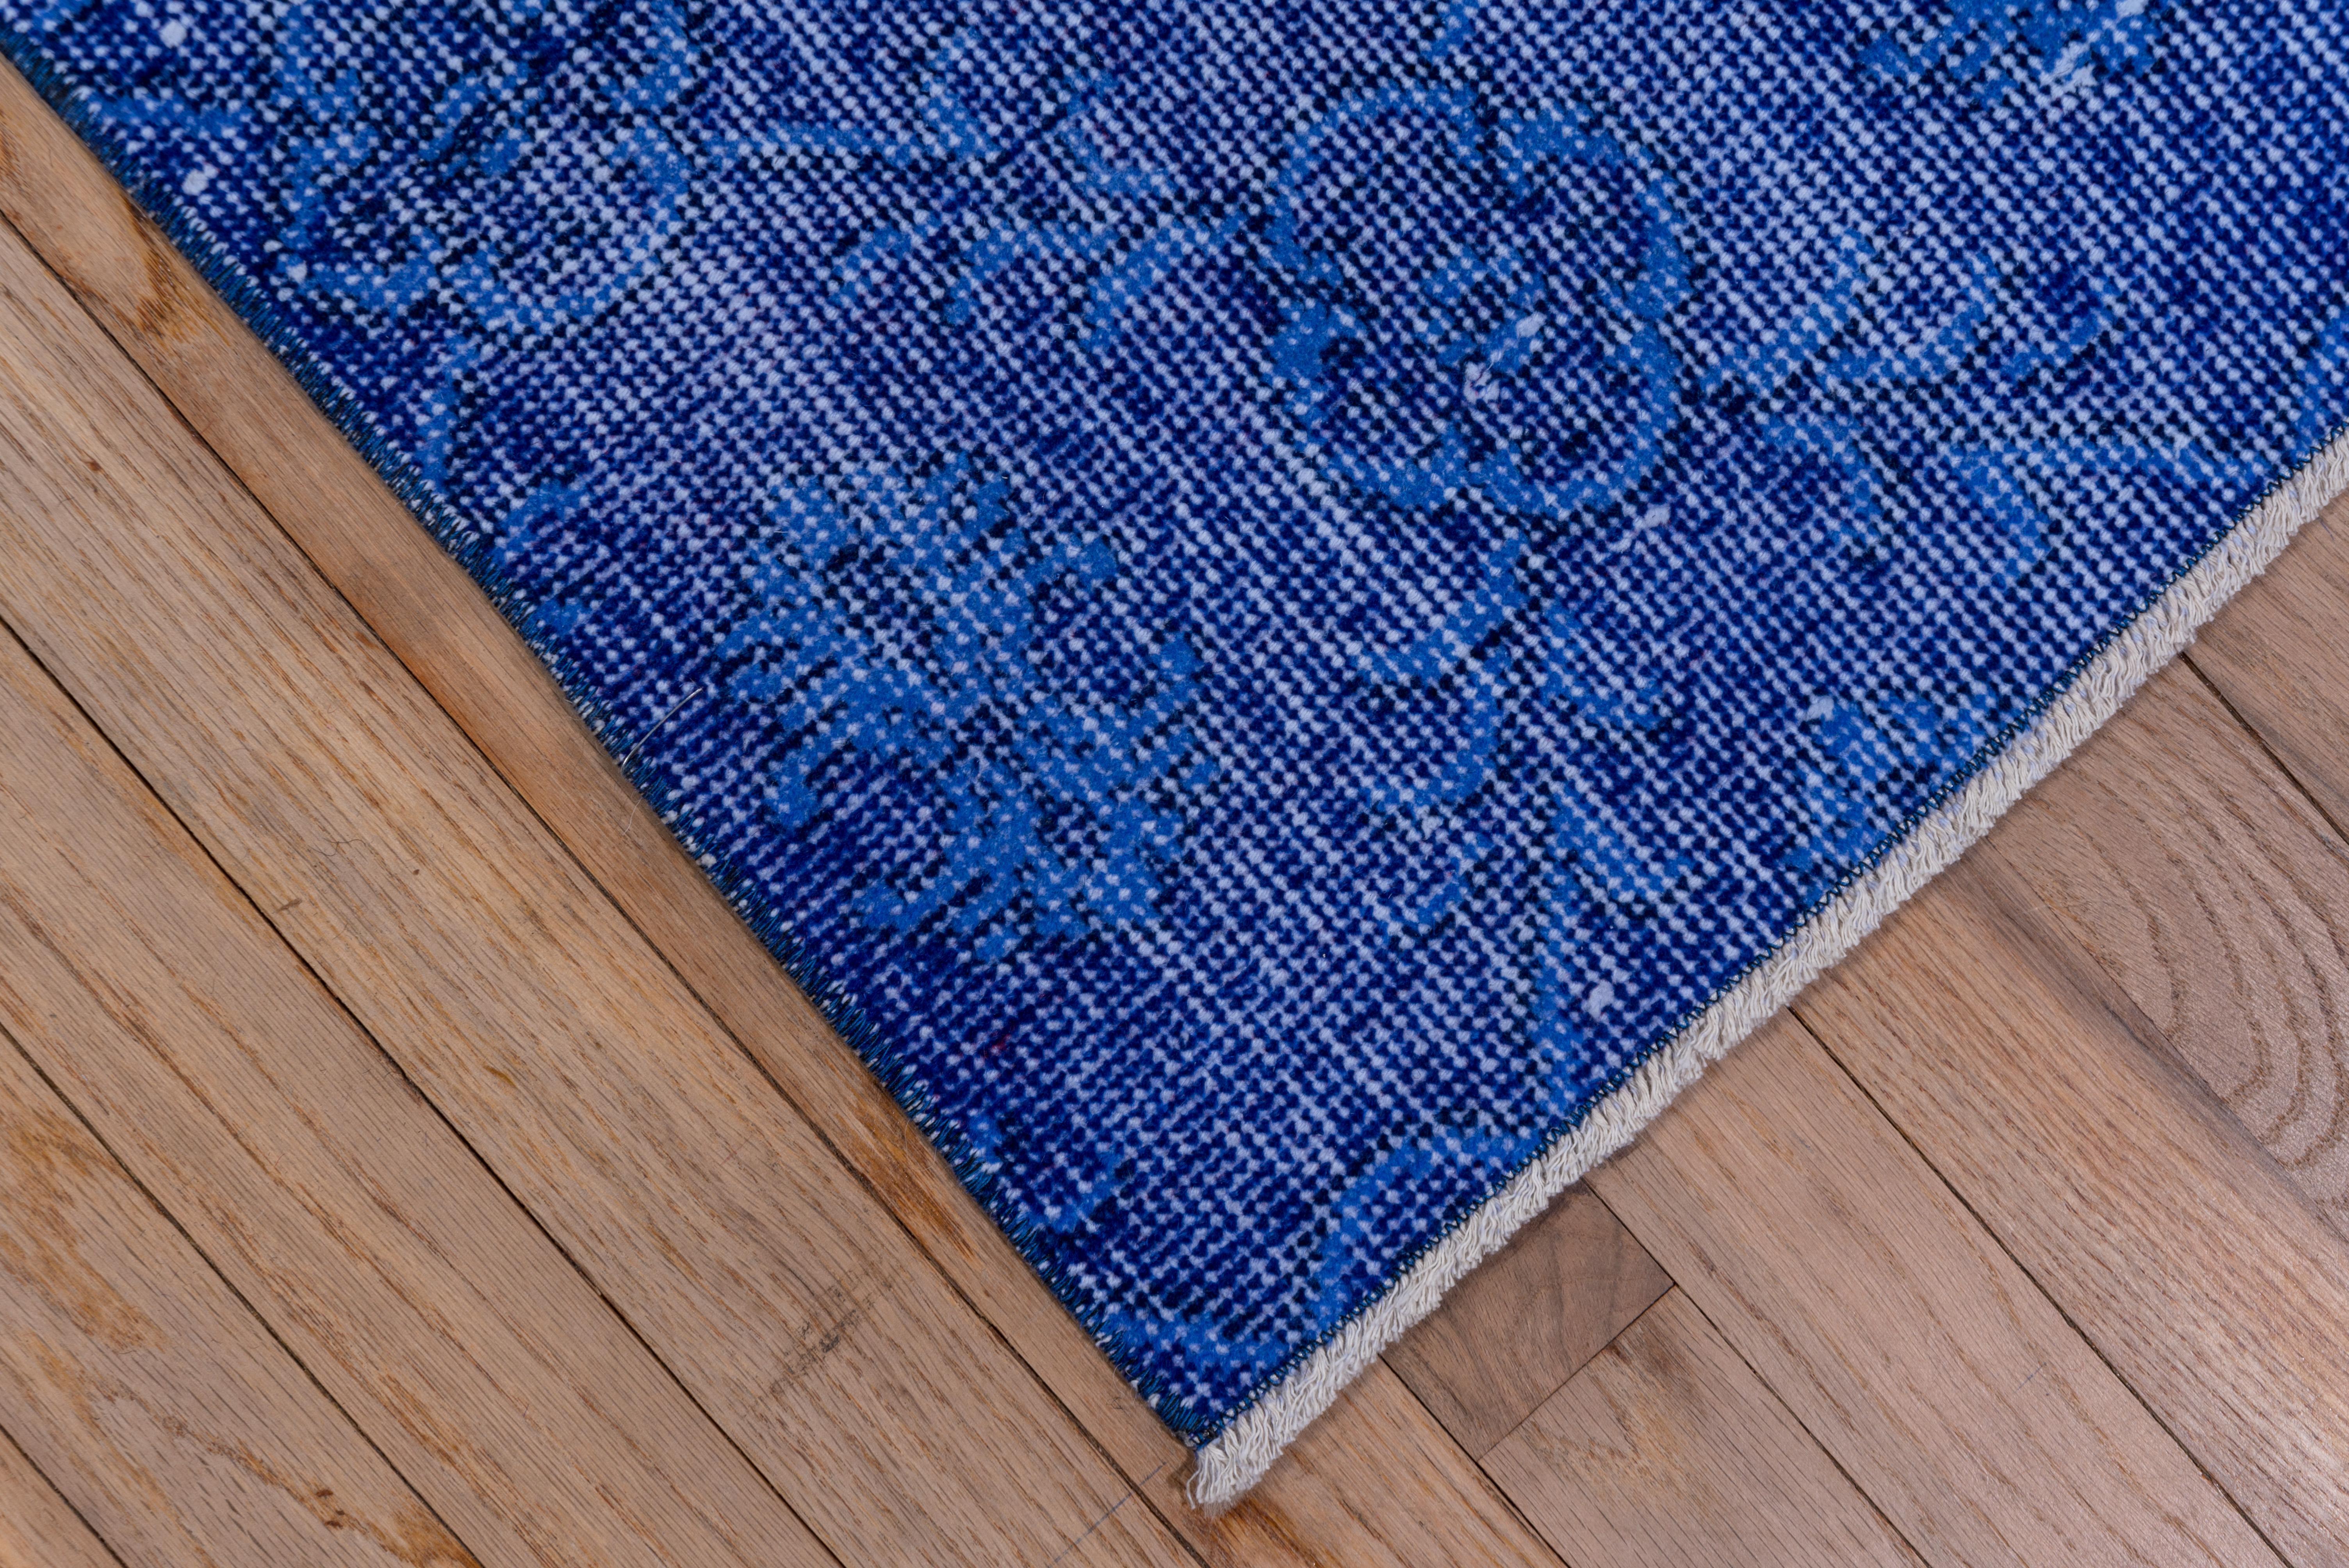 Vintage Indigo Overdyed Sparta Wool Rug, Shabby Chic In Good Condition For Sale In New York, NY